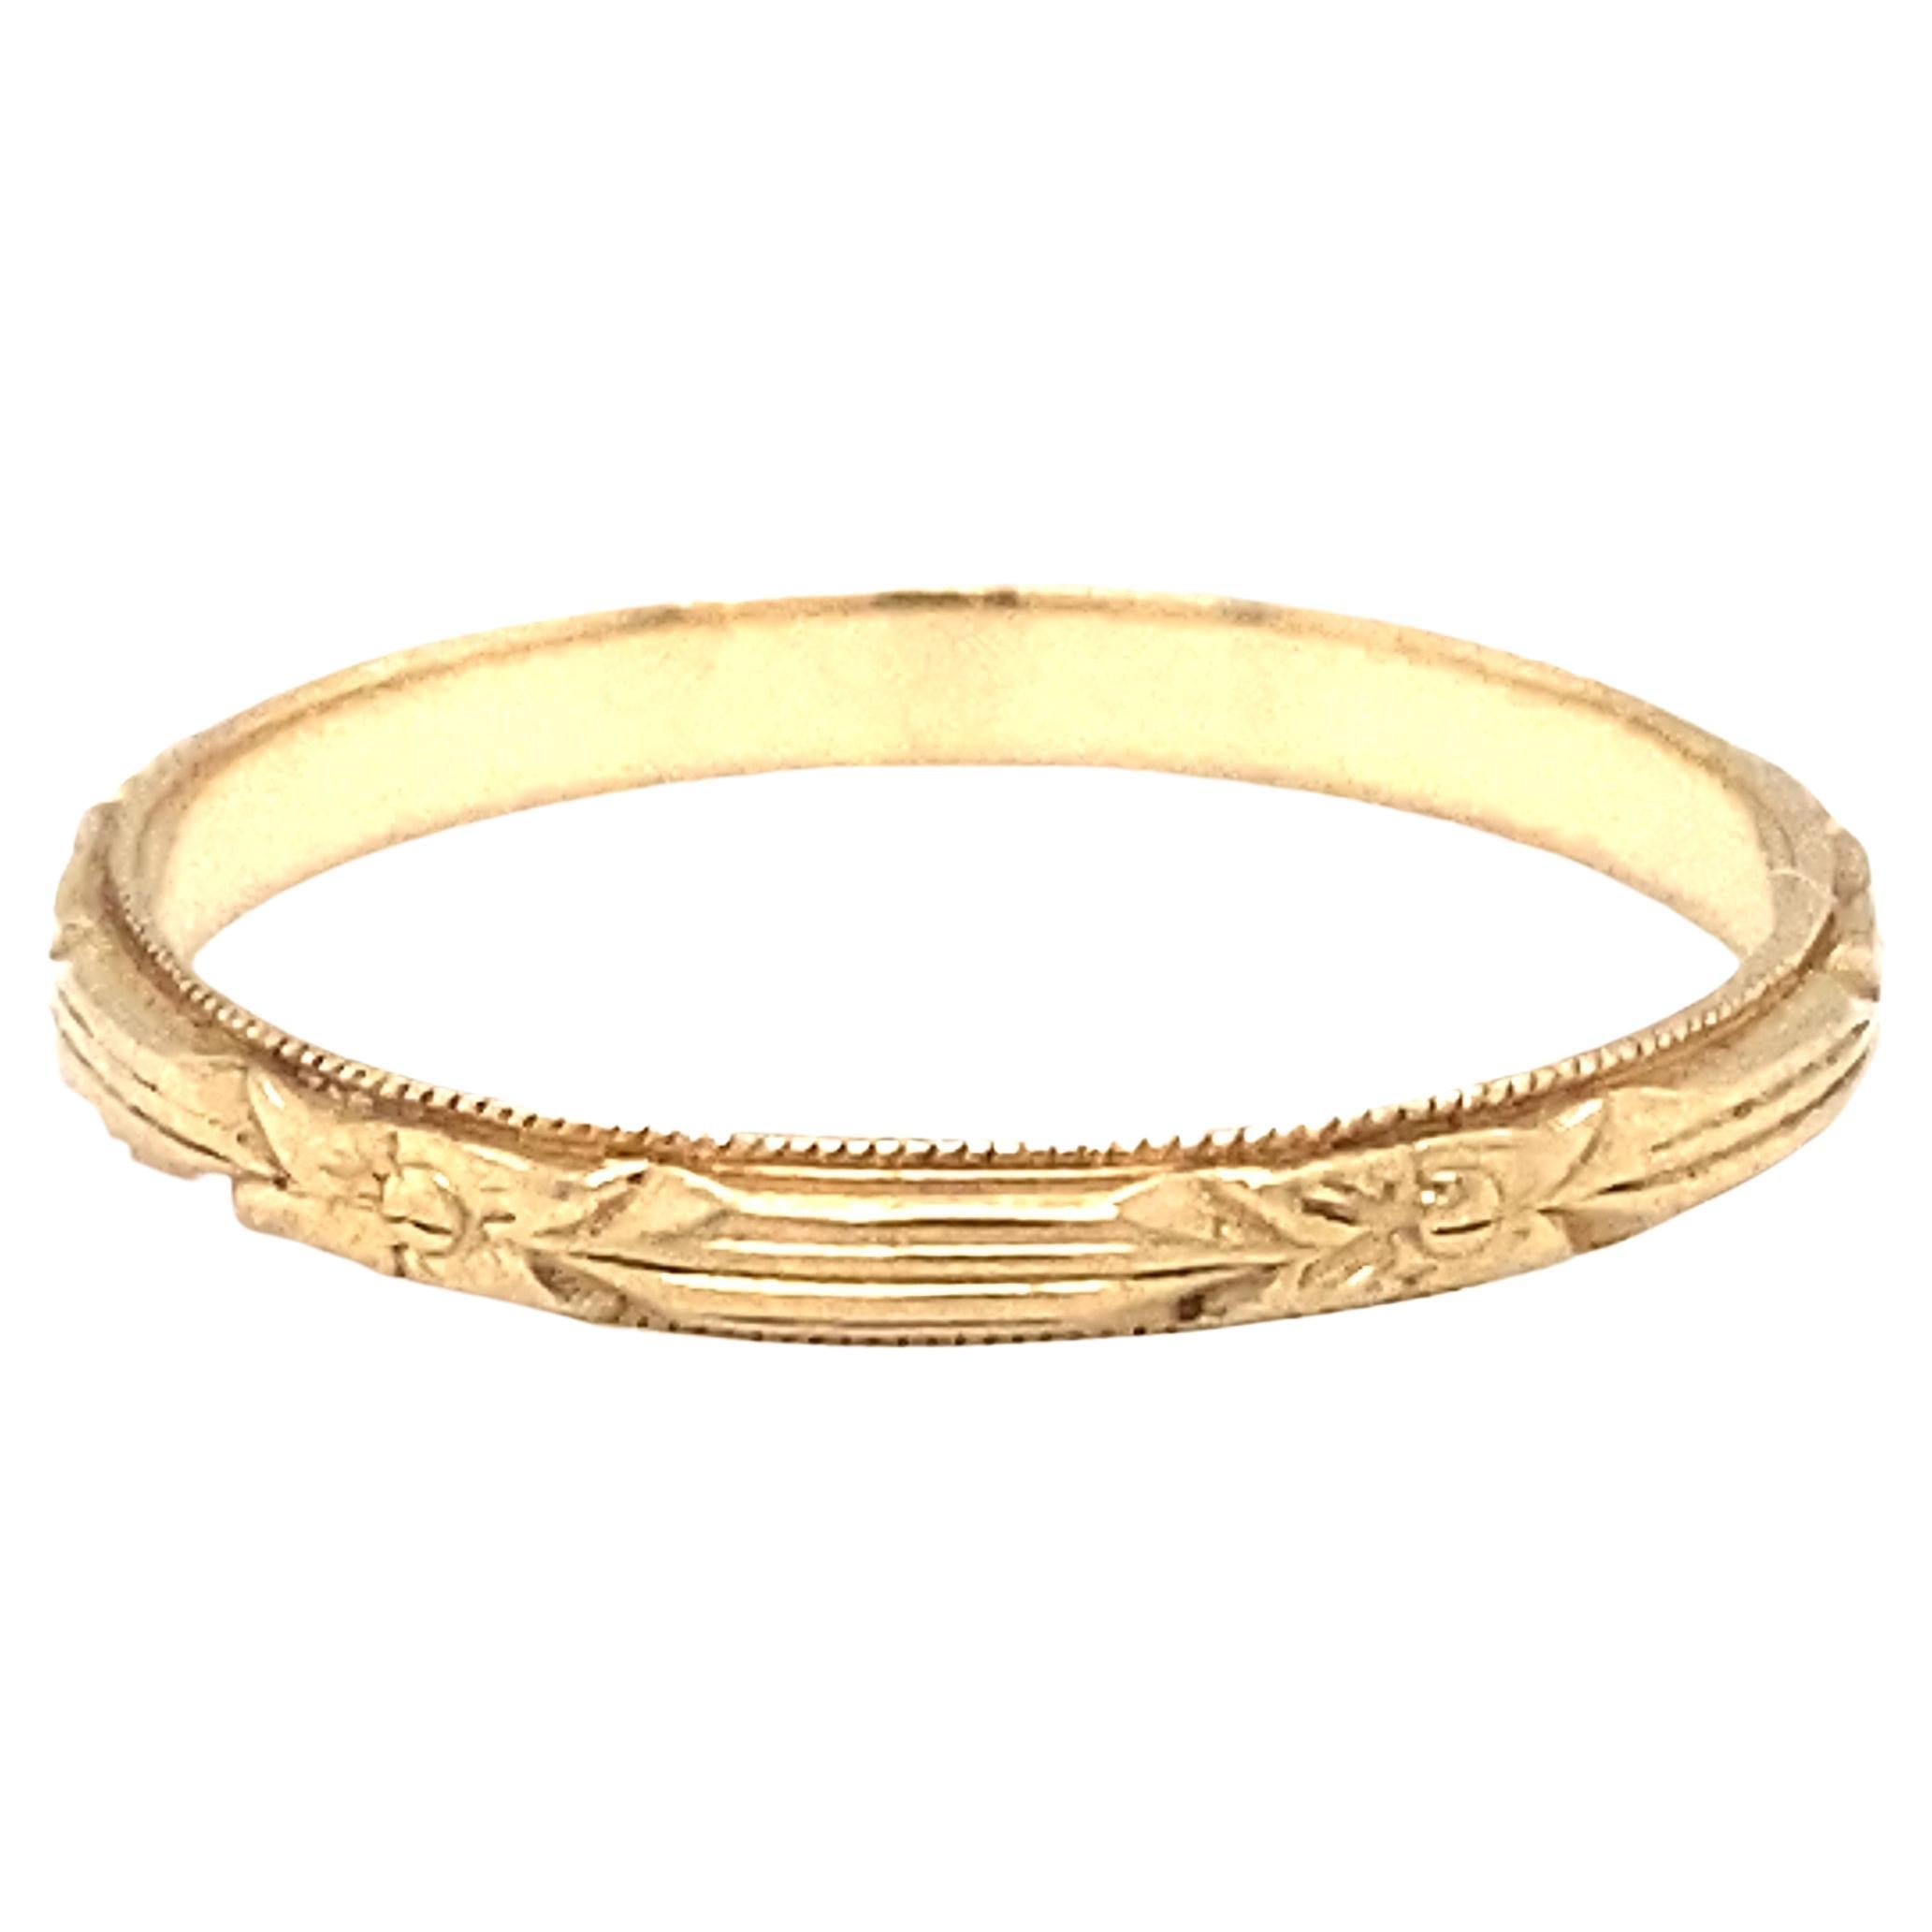 Circa 1920s Art Deco Floral Design Wedding Band in 14 Karat Yellow Gold For Sale